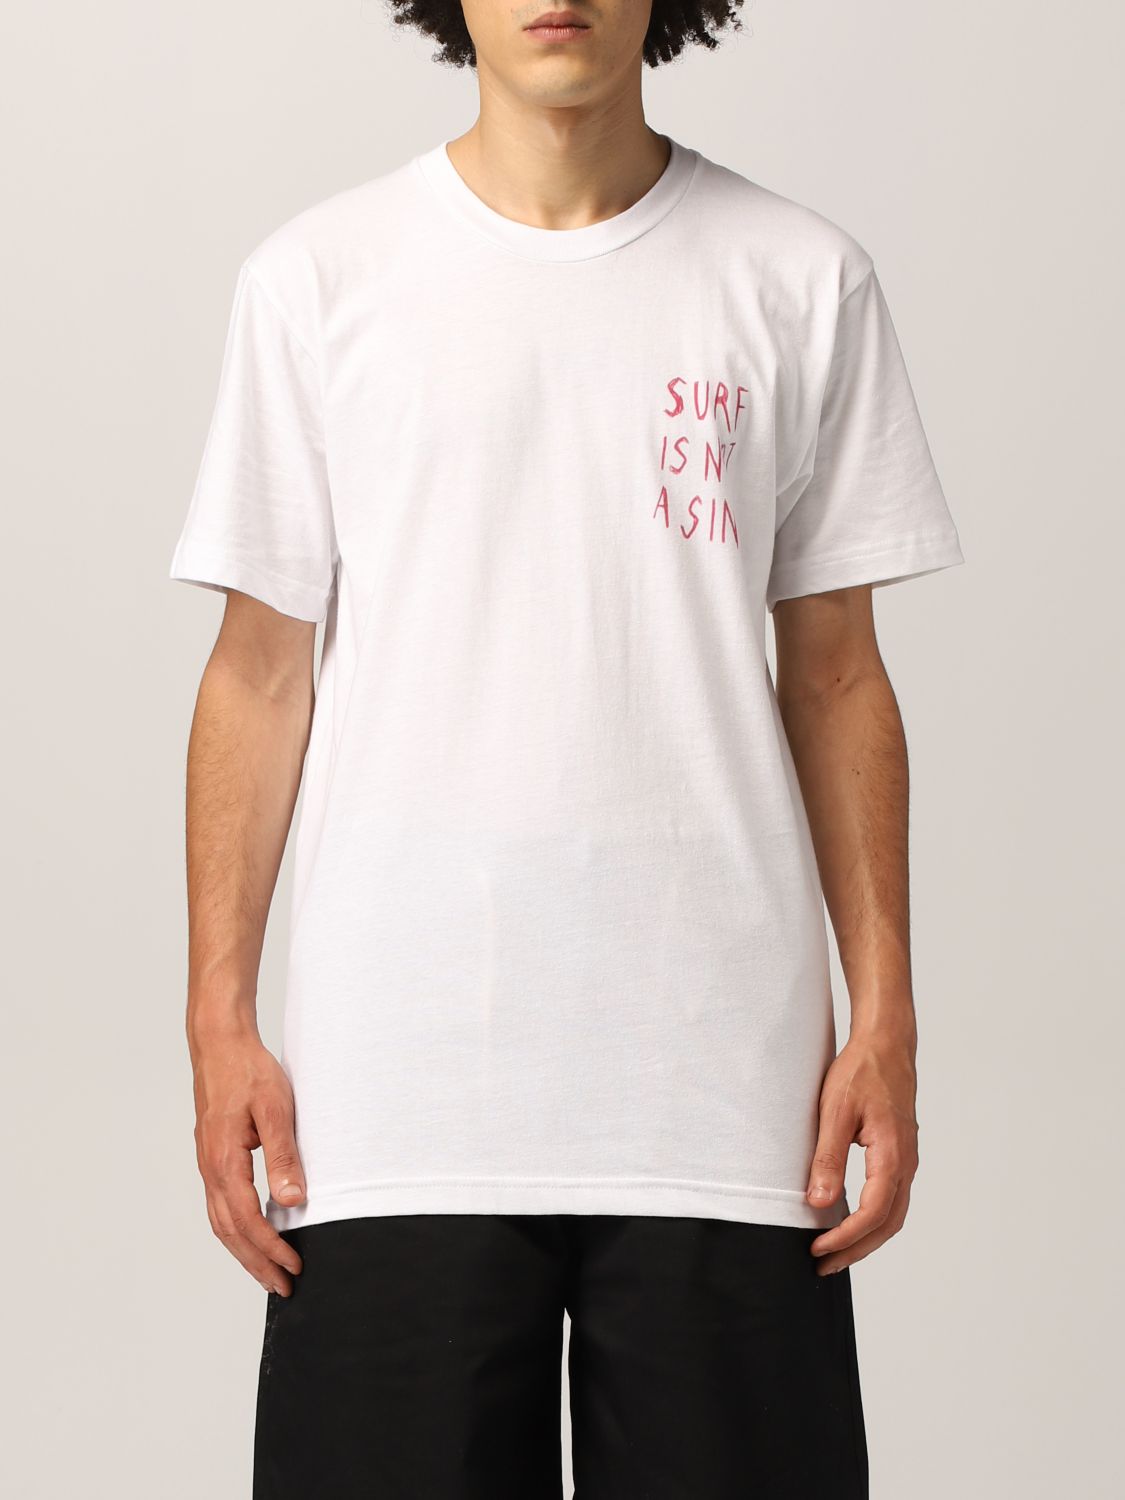 SILTED: t-shirt for man - White | Silted t-shirt TSJE-WH online on ...